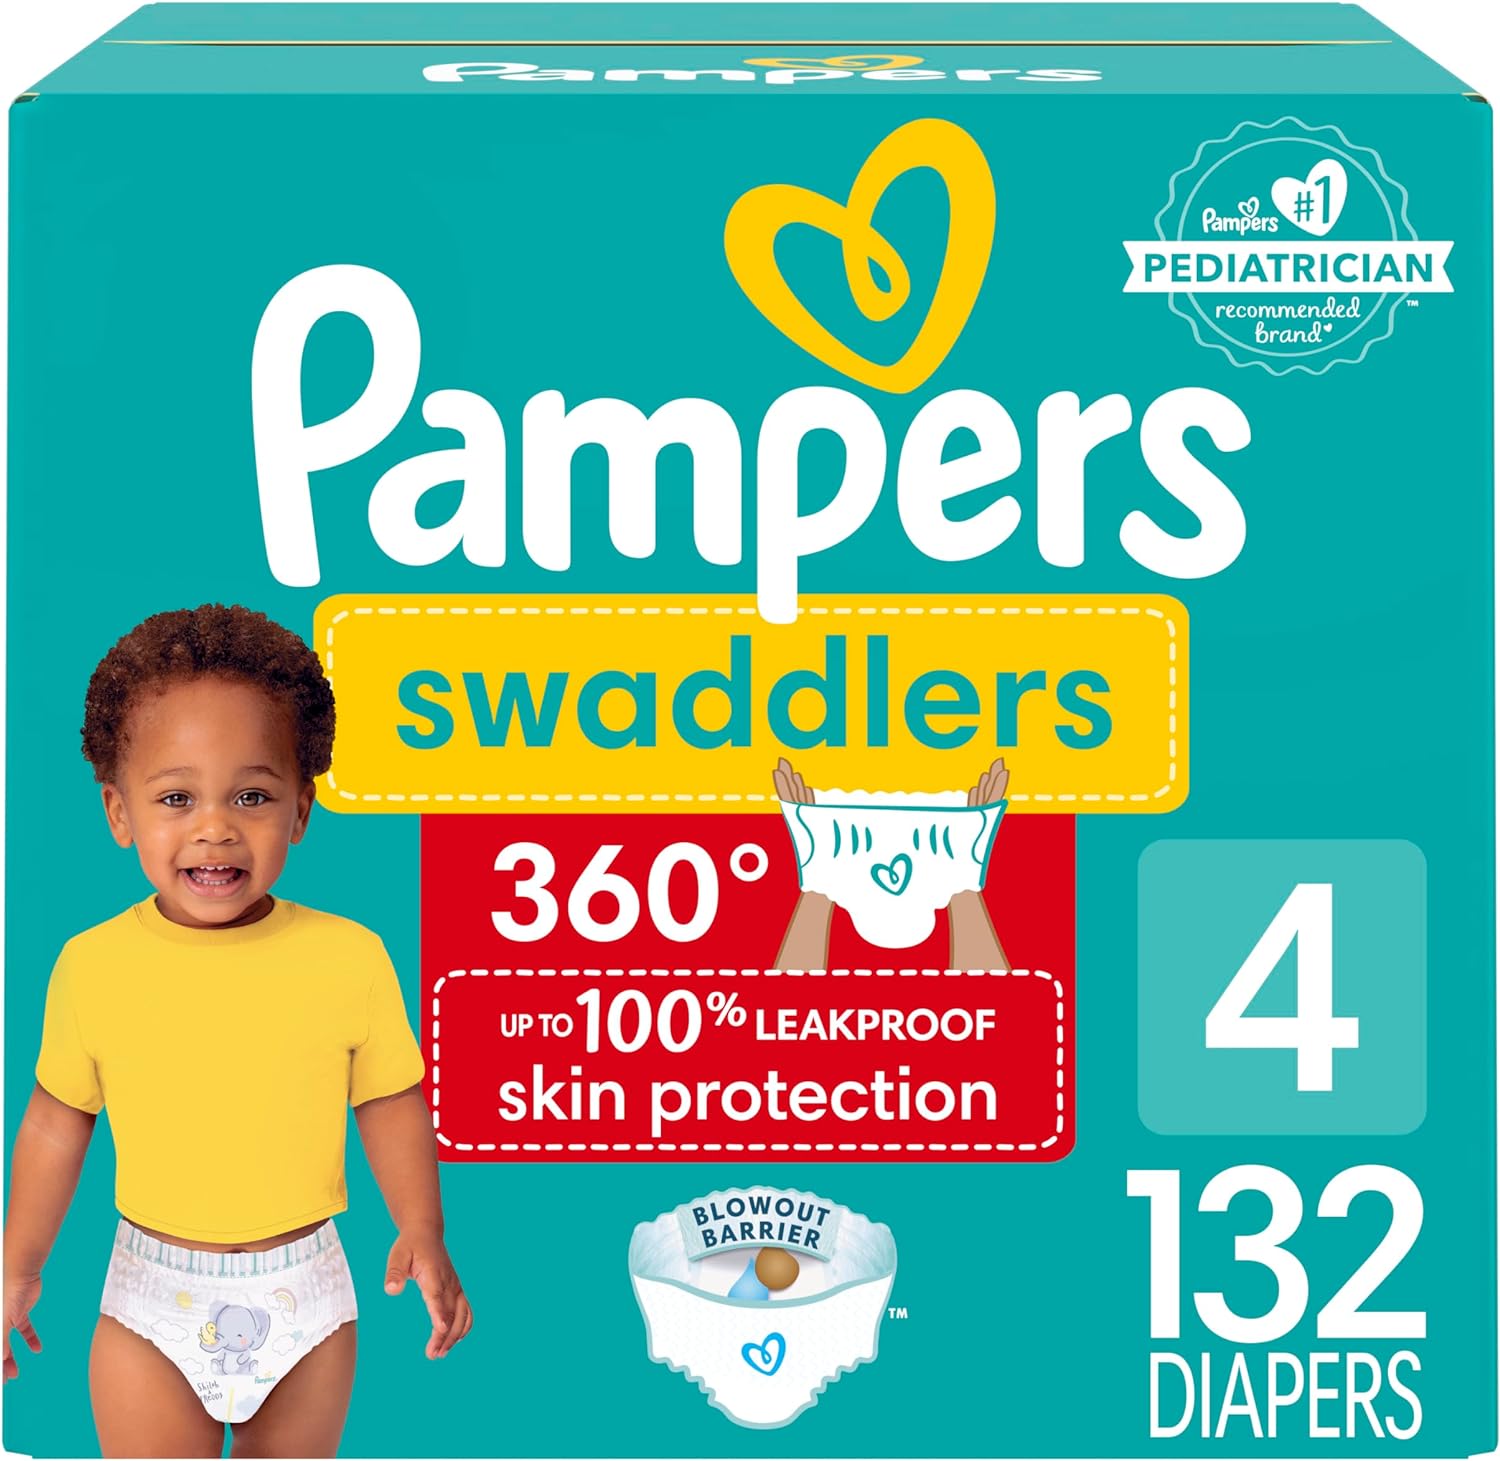 Pampers Swaddlers 360 Pull-On Diapers, Size 4, 132 Count, One Month Supply, for up to 100% Leakproof Skin Protection and Easy Changes